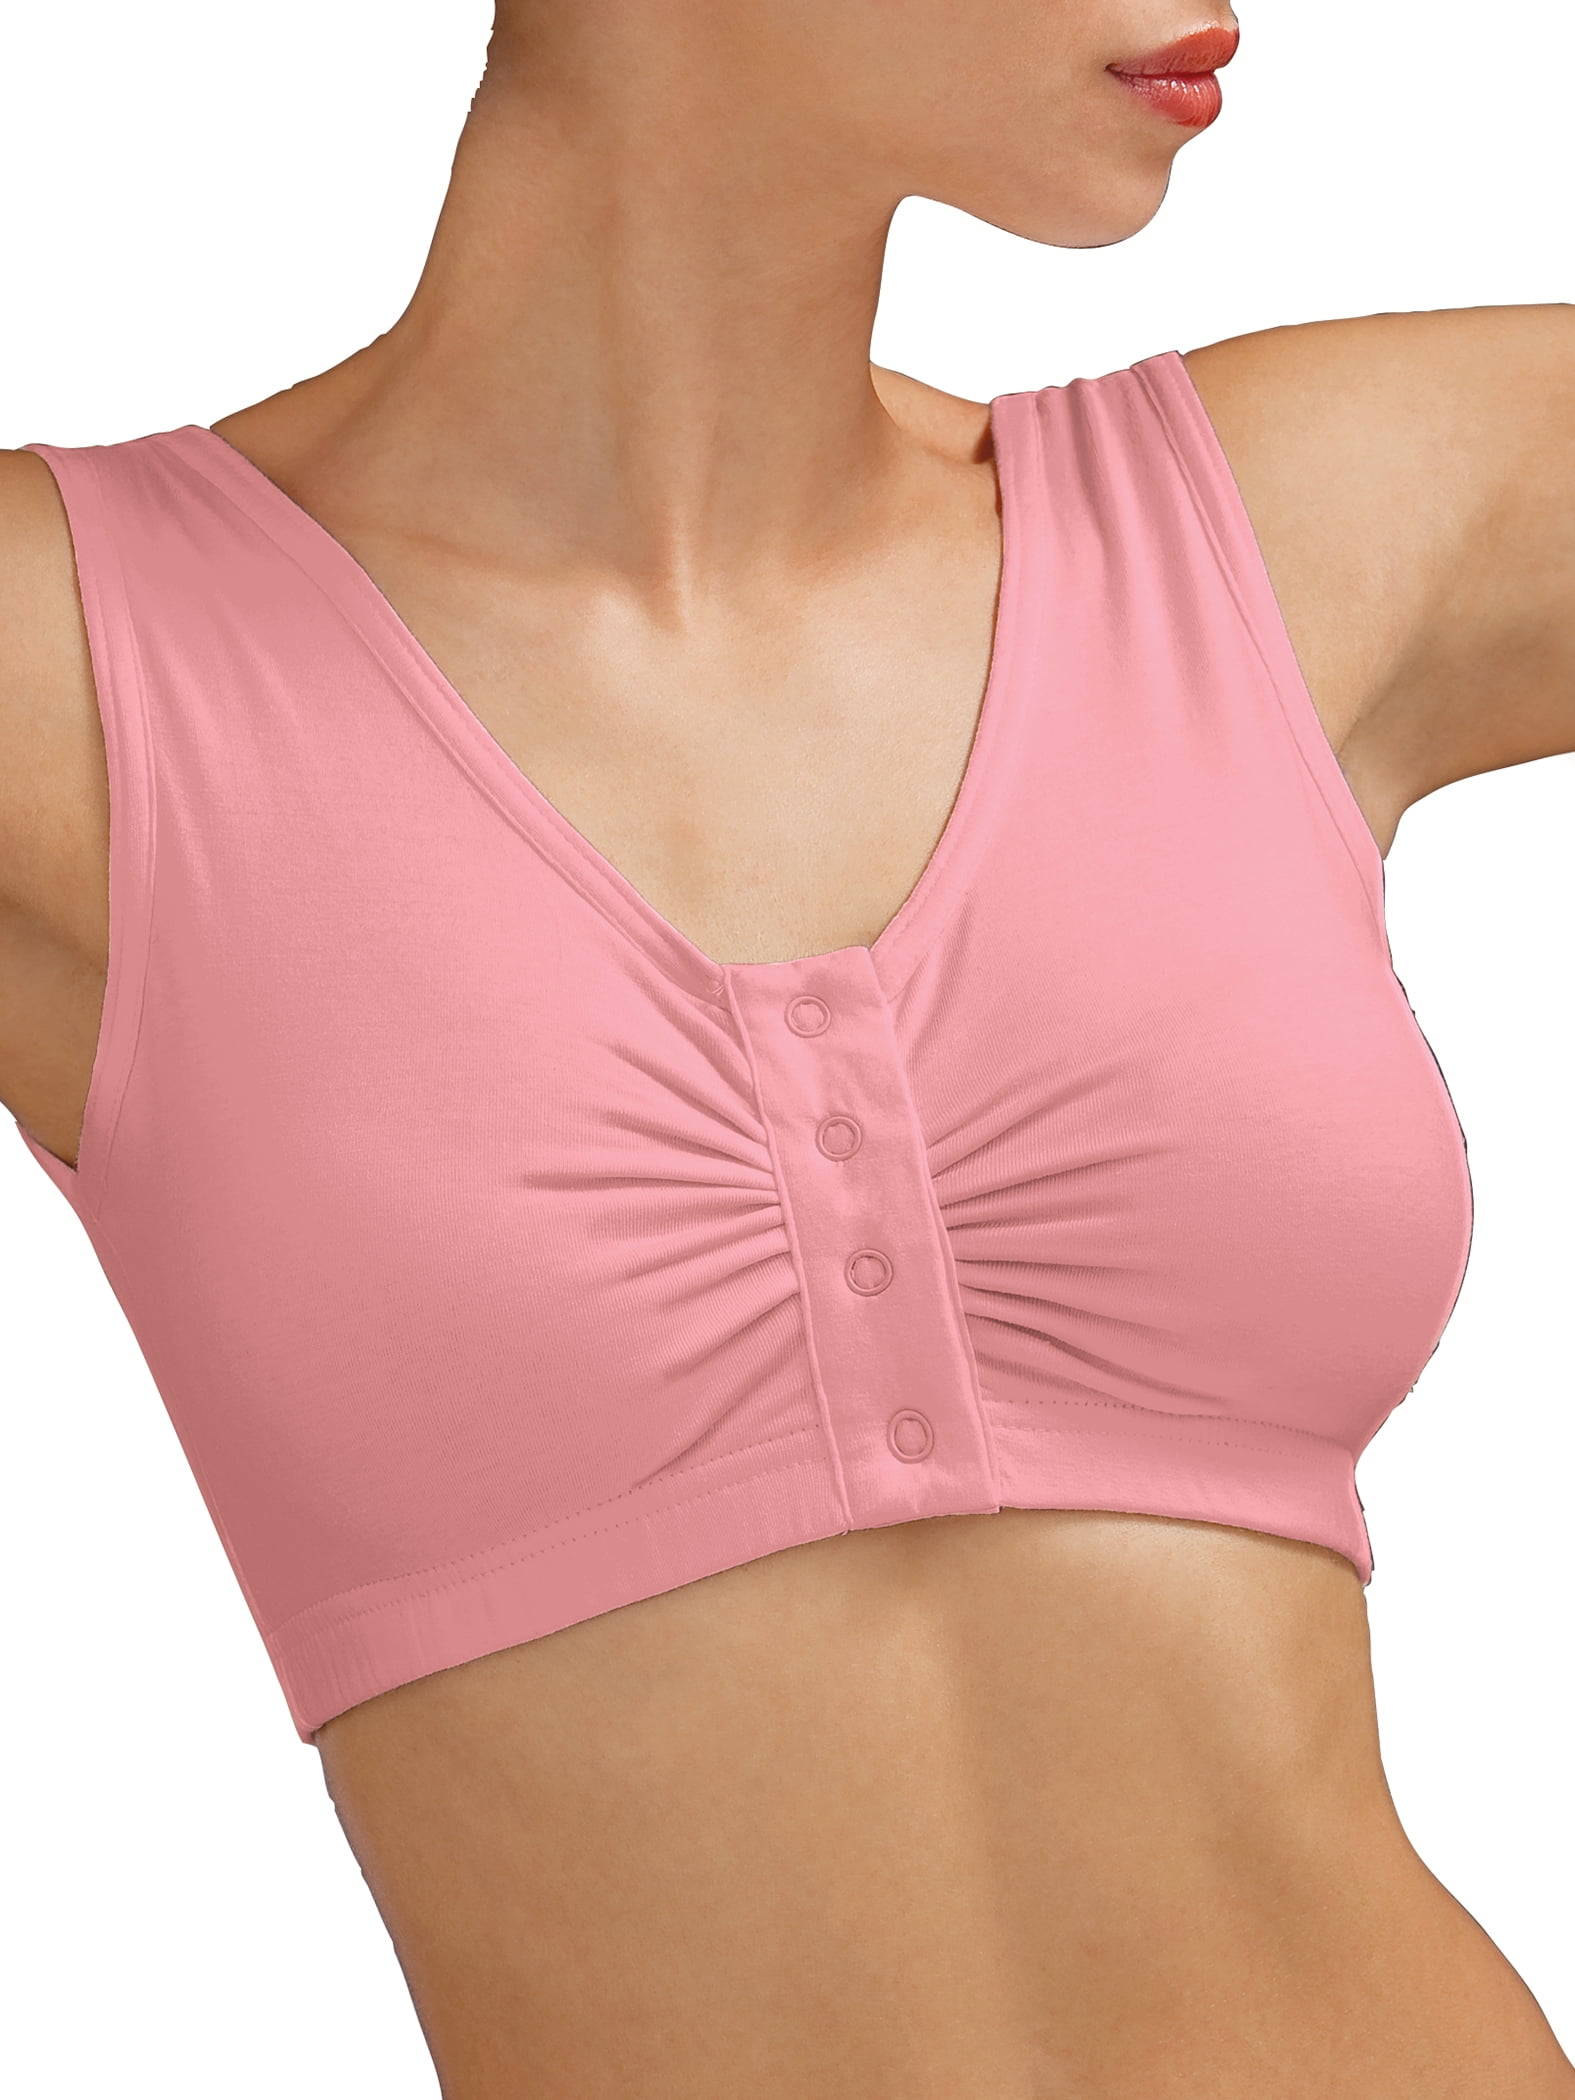 Collections Etc Women's Wide Shoulder Strap Seamless Easy-Close Snap Front  Bra Pink Large 